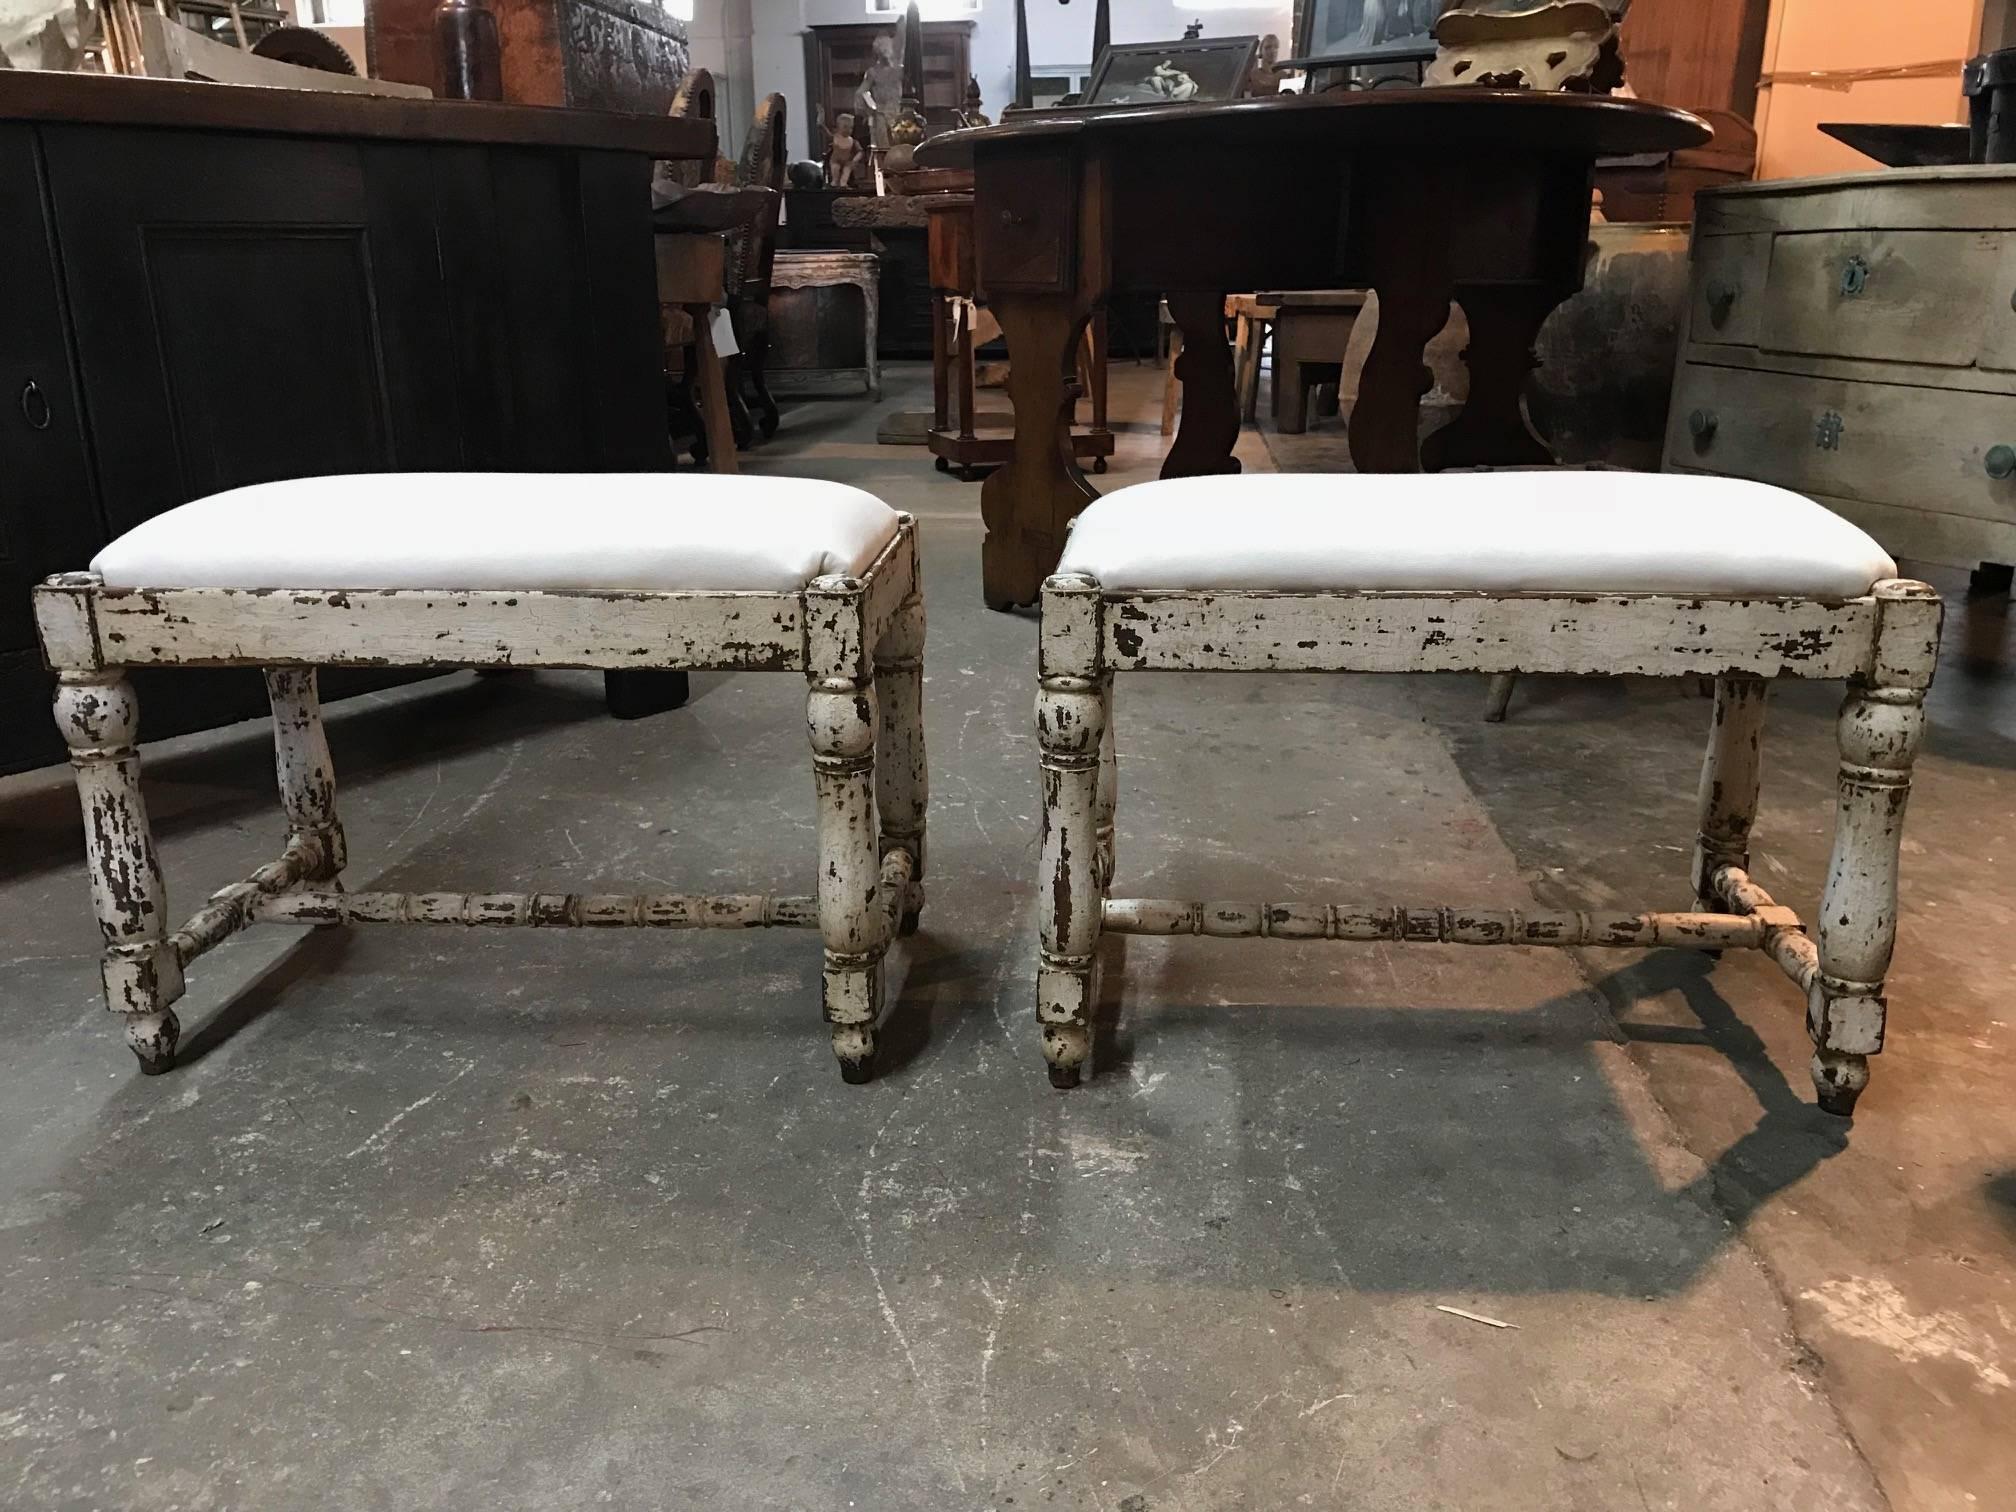 A charming pair of later 19th century benches from the Catalan region of Spain.  Beautifully constructed from painted wood with nicely turned legs and stretchers.  